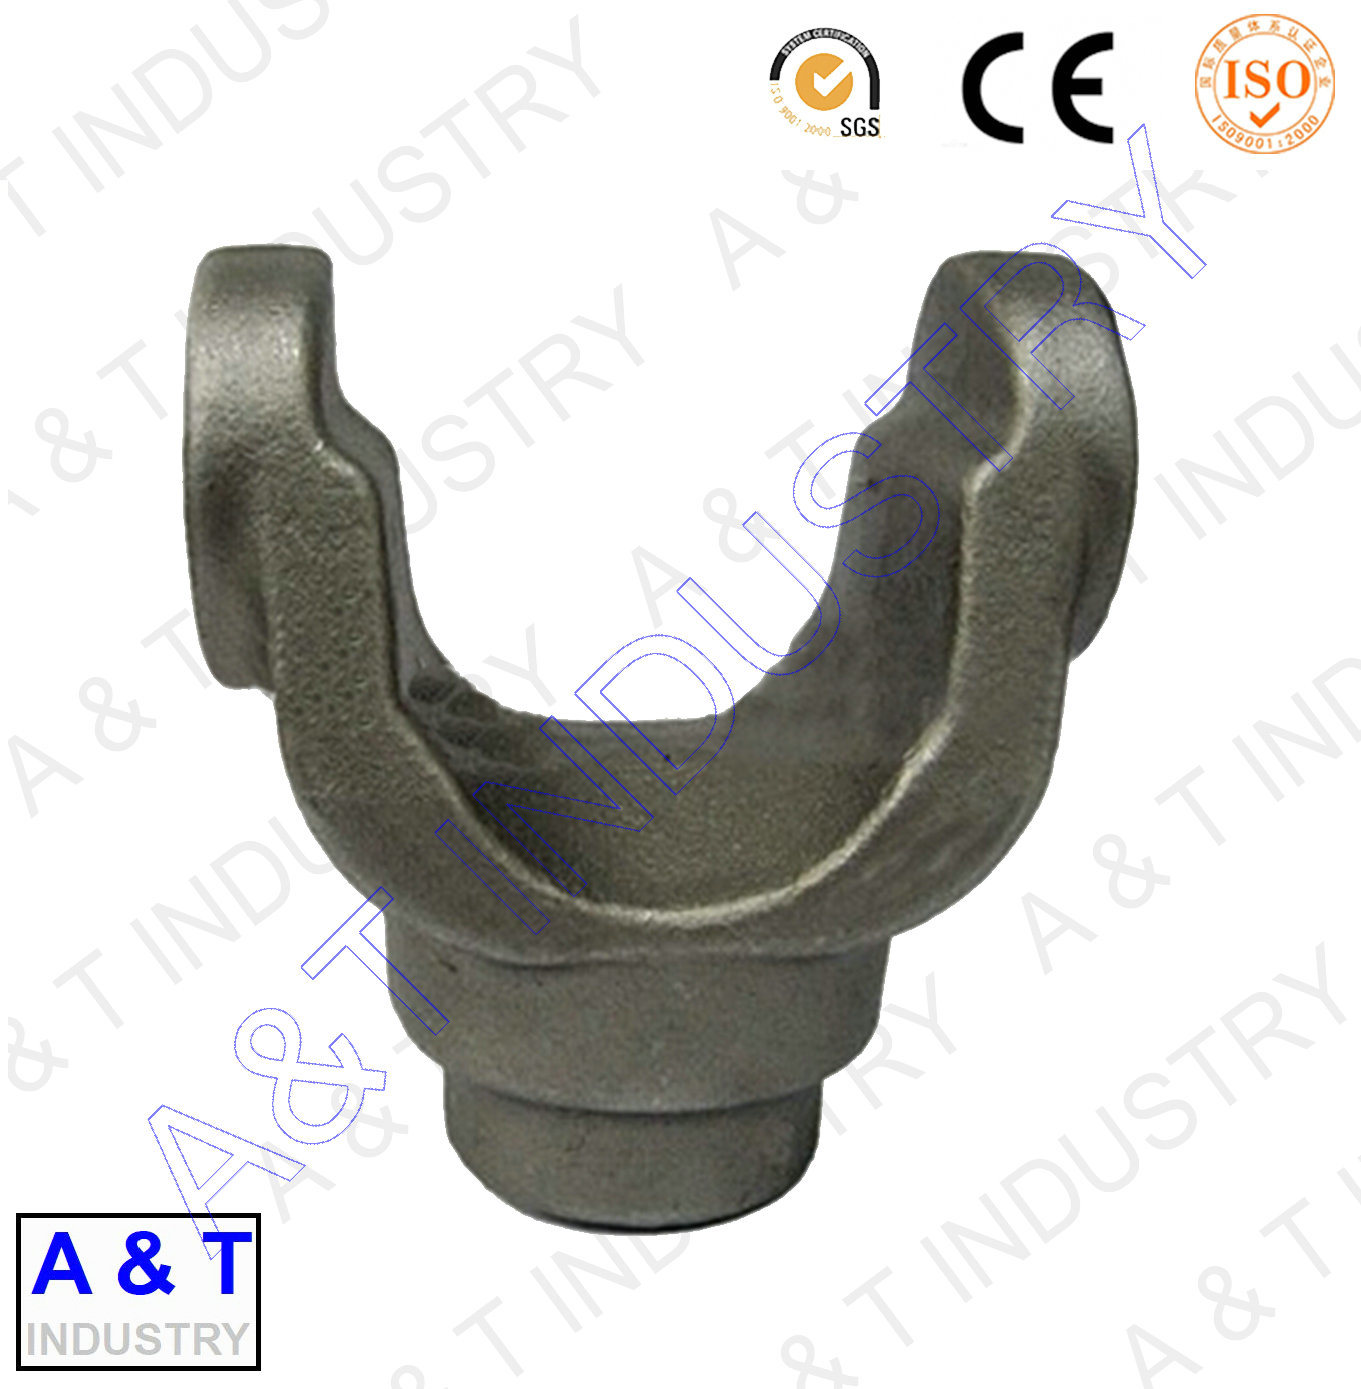 Precision Auto Part Forged Part for Yoke Sleeve Steering of Drive Shaft